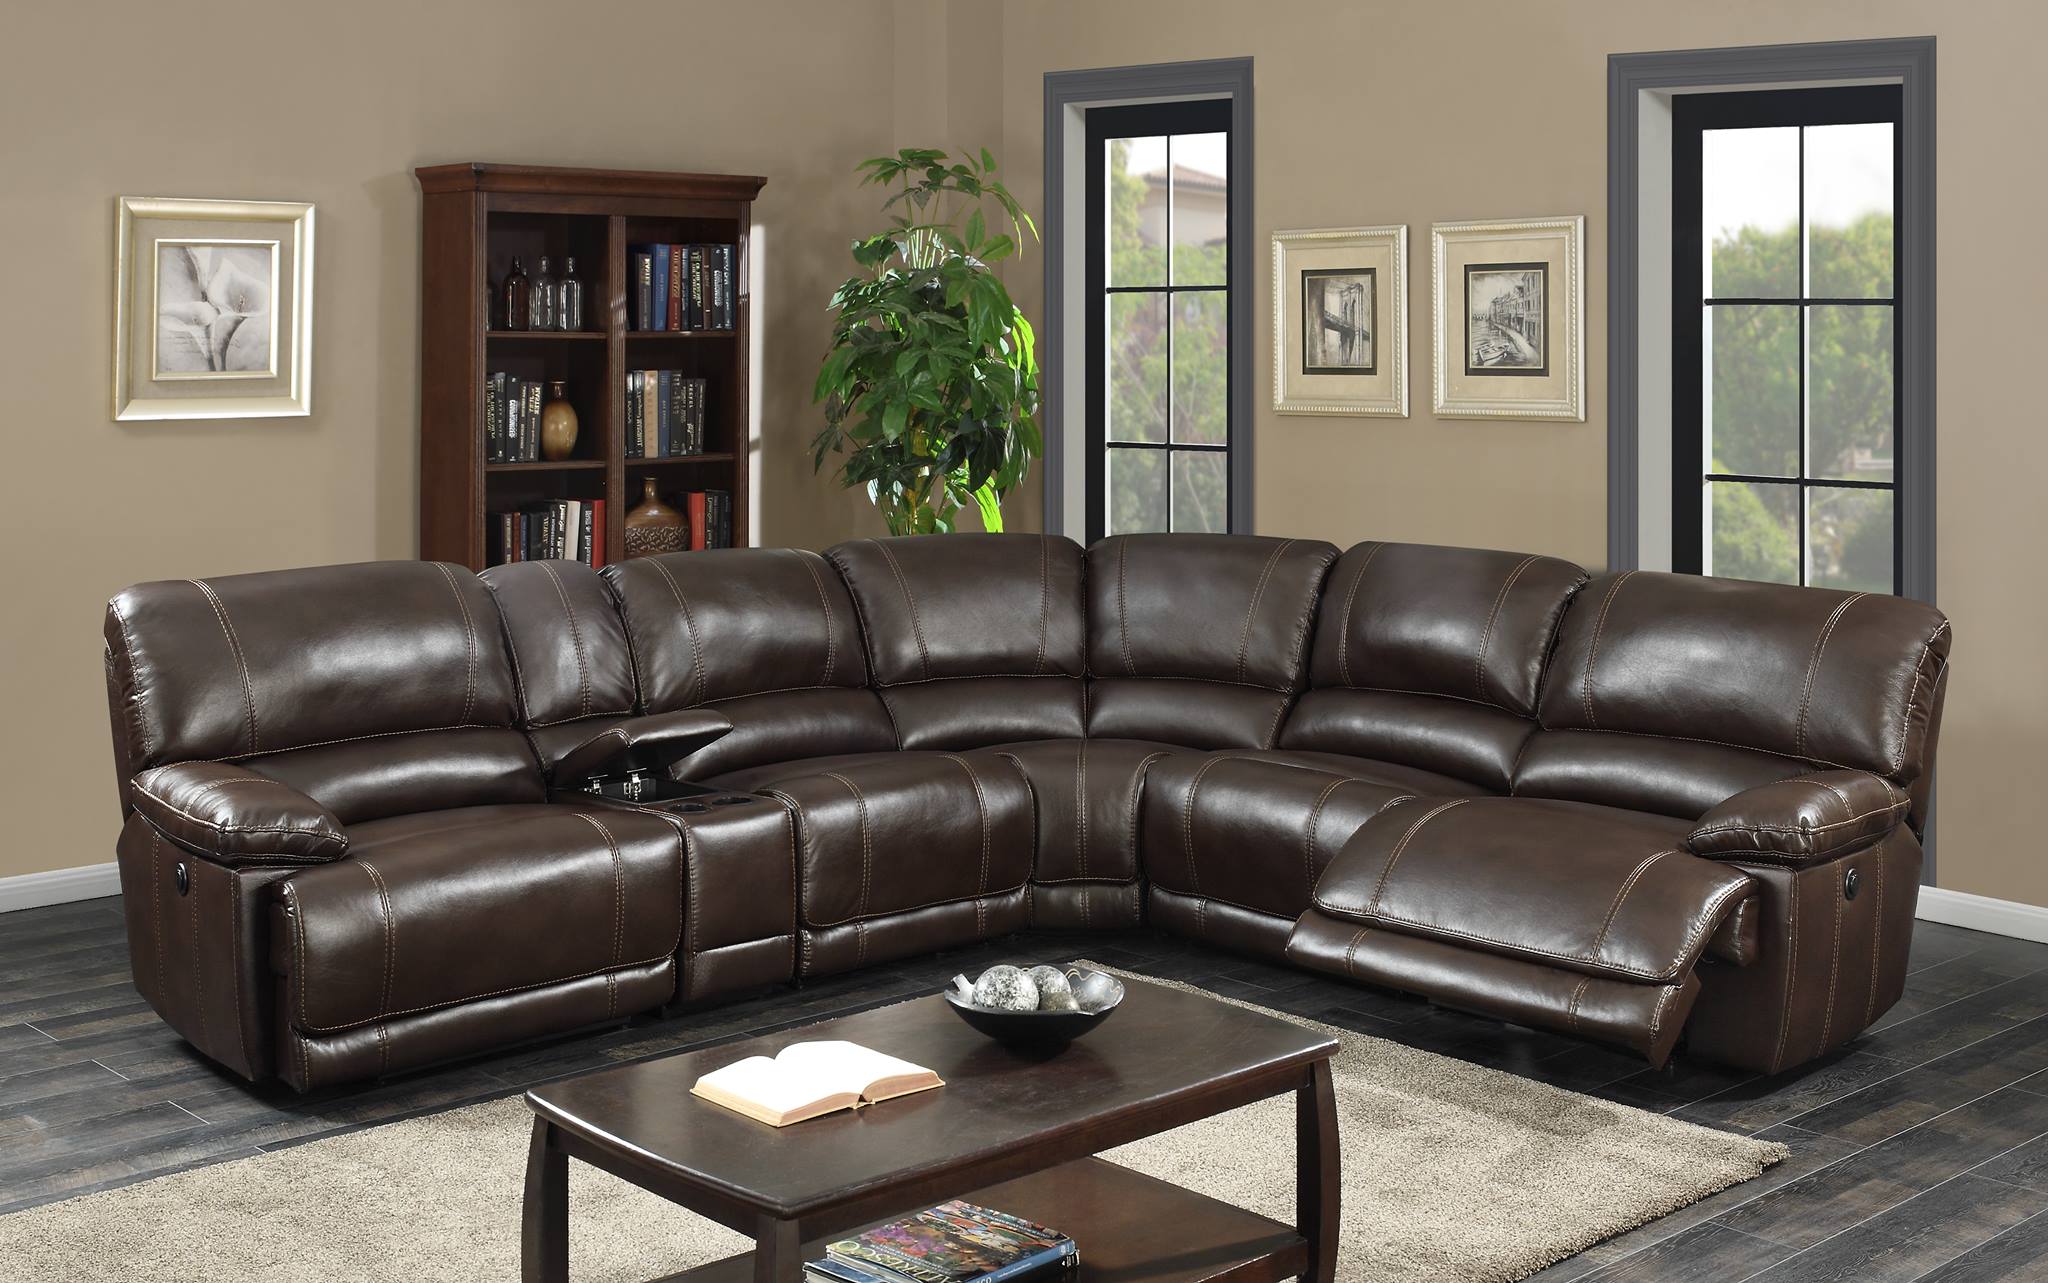 Venice Leather Gel Reclining Sectional, Danvors 7 Pc Leather Sectional Sofa Reviews